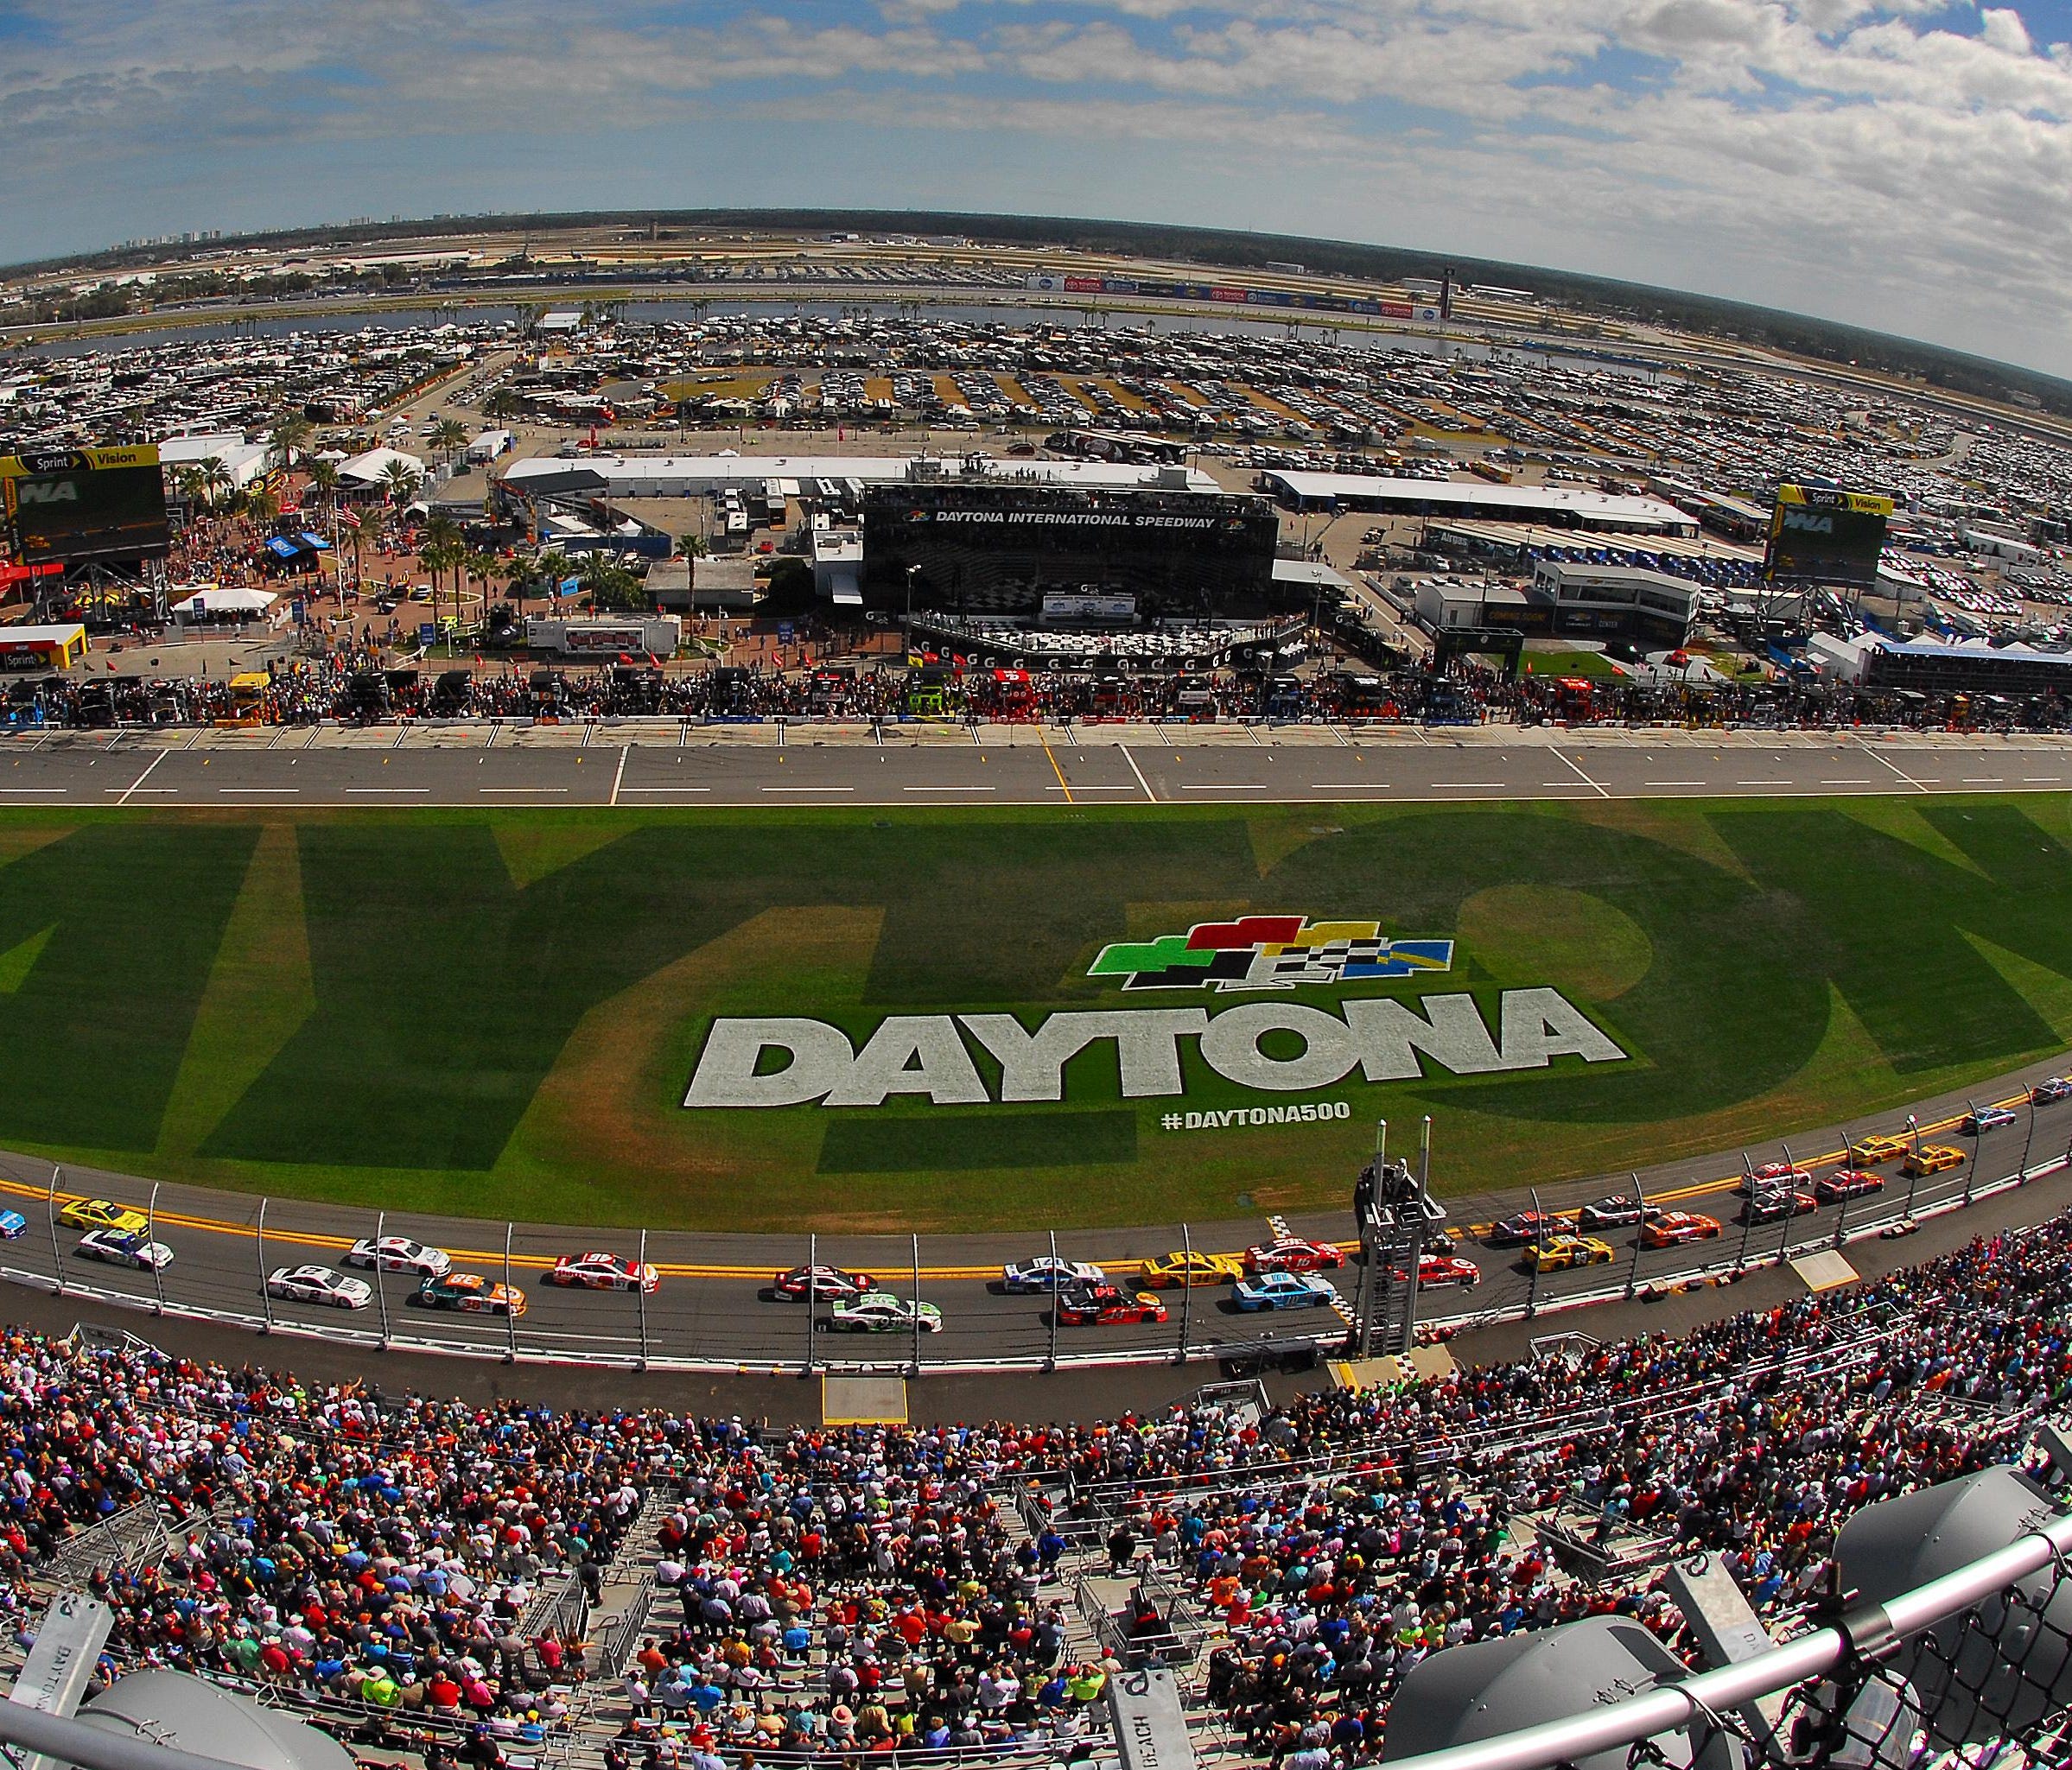 A look at Daytona International Speedway prior to the start of last year's 58th annual Daytona 500.